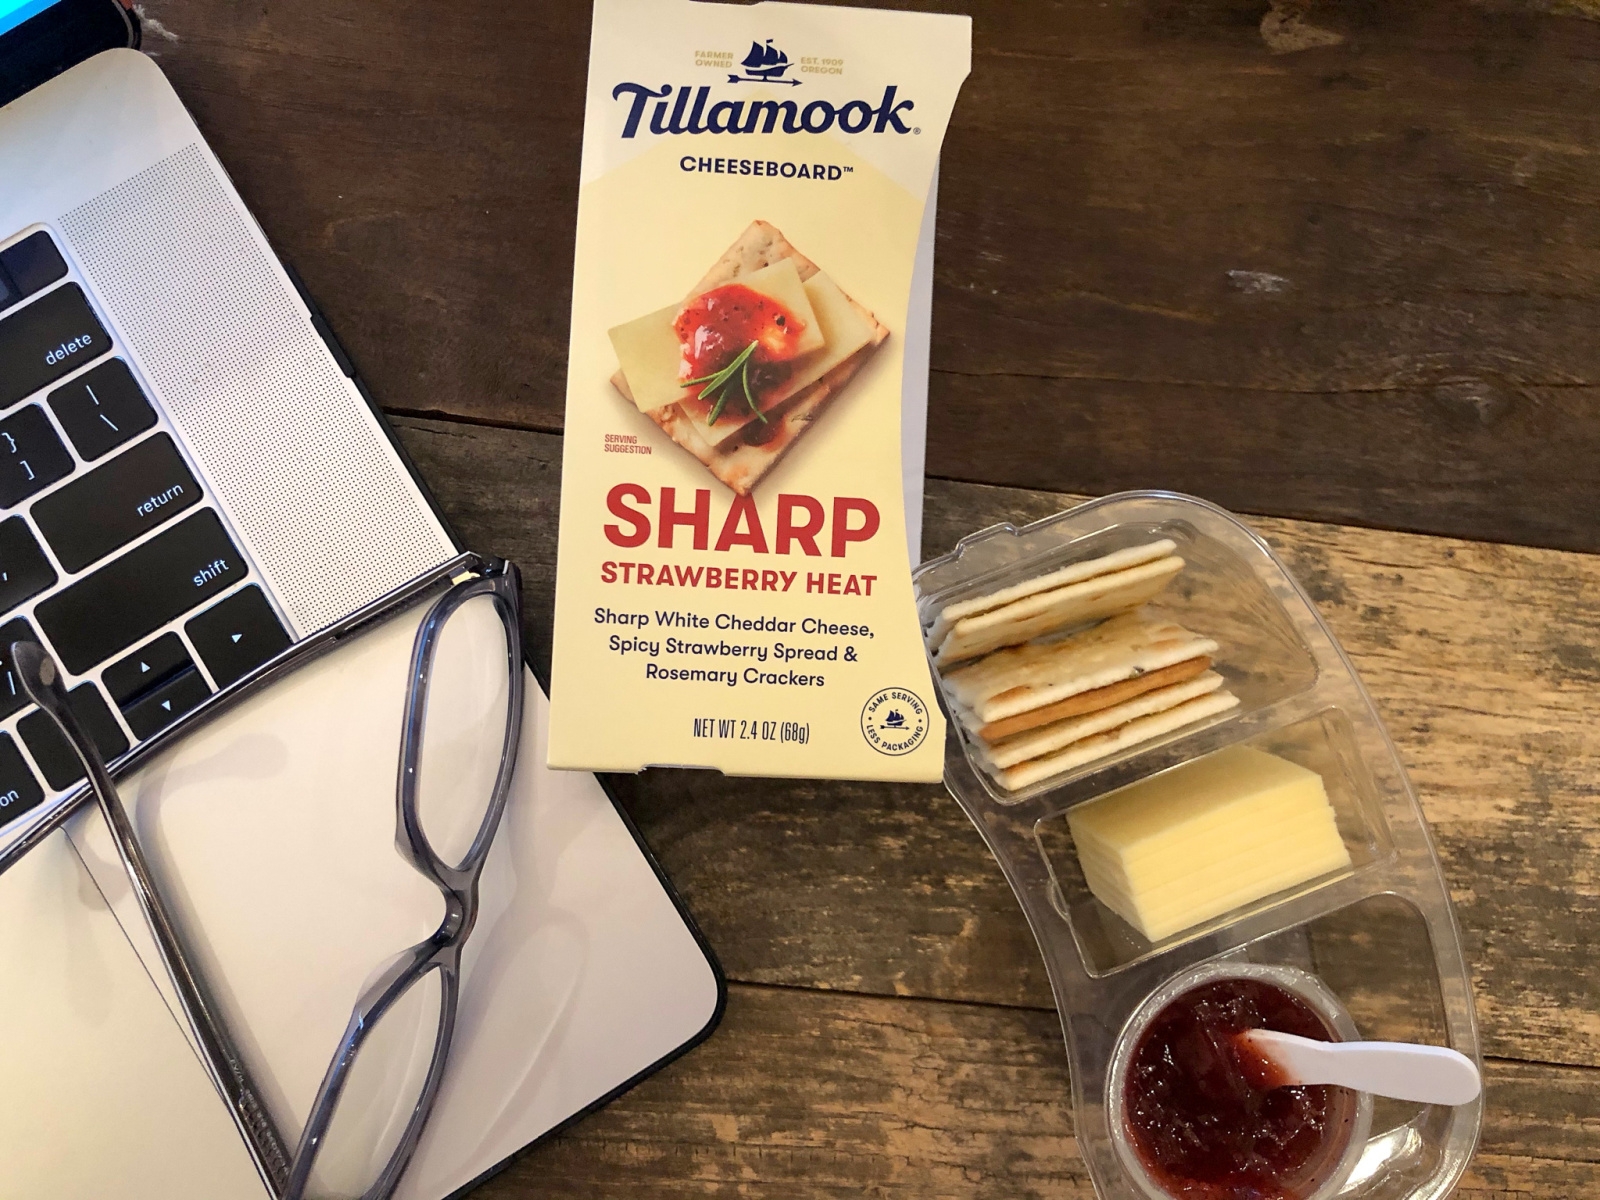 Get Back Into Routine With Savings On Tillamook At Publix